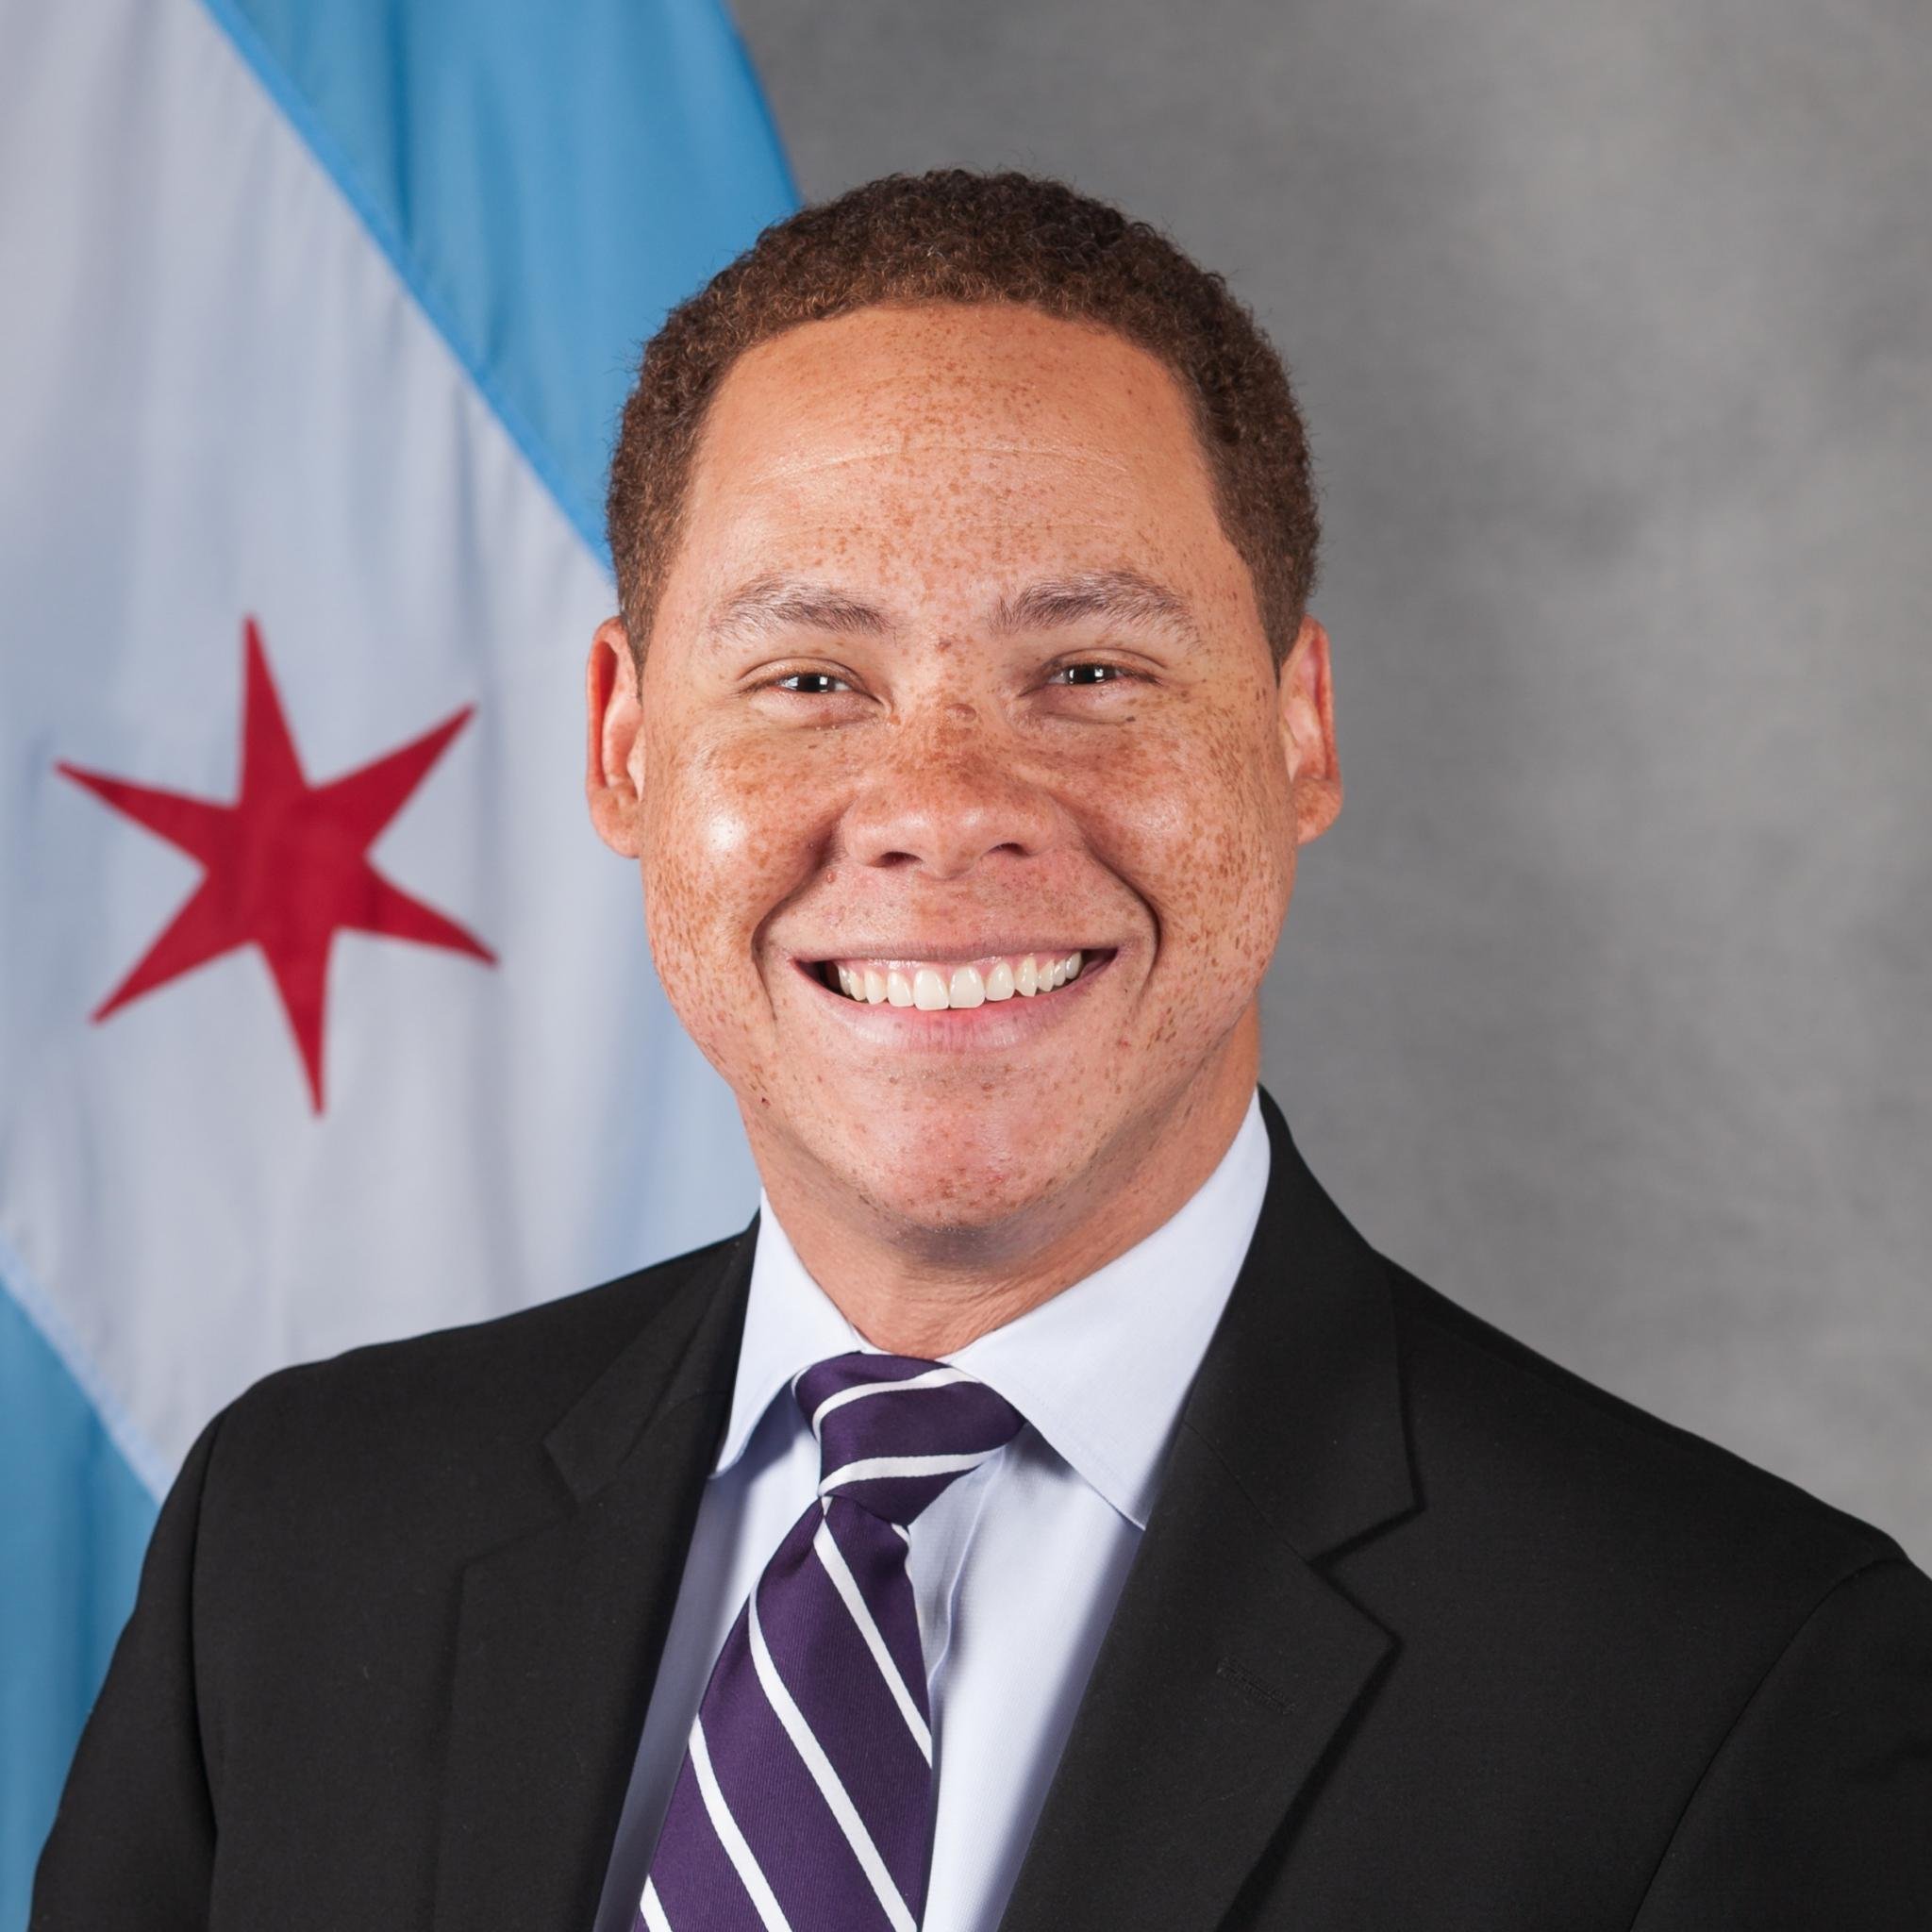 47th Ward Alderman. Publicly Finance Elections. Reestablish the Dept of Environment. Build Protected Bike Lanes. Email info@aldermanmartin.com for requests.